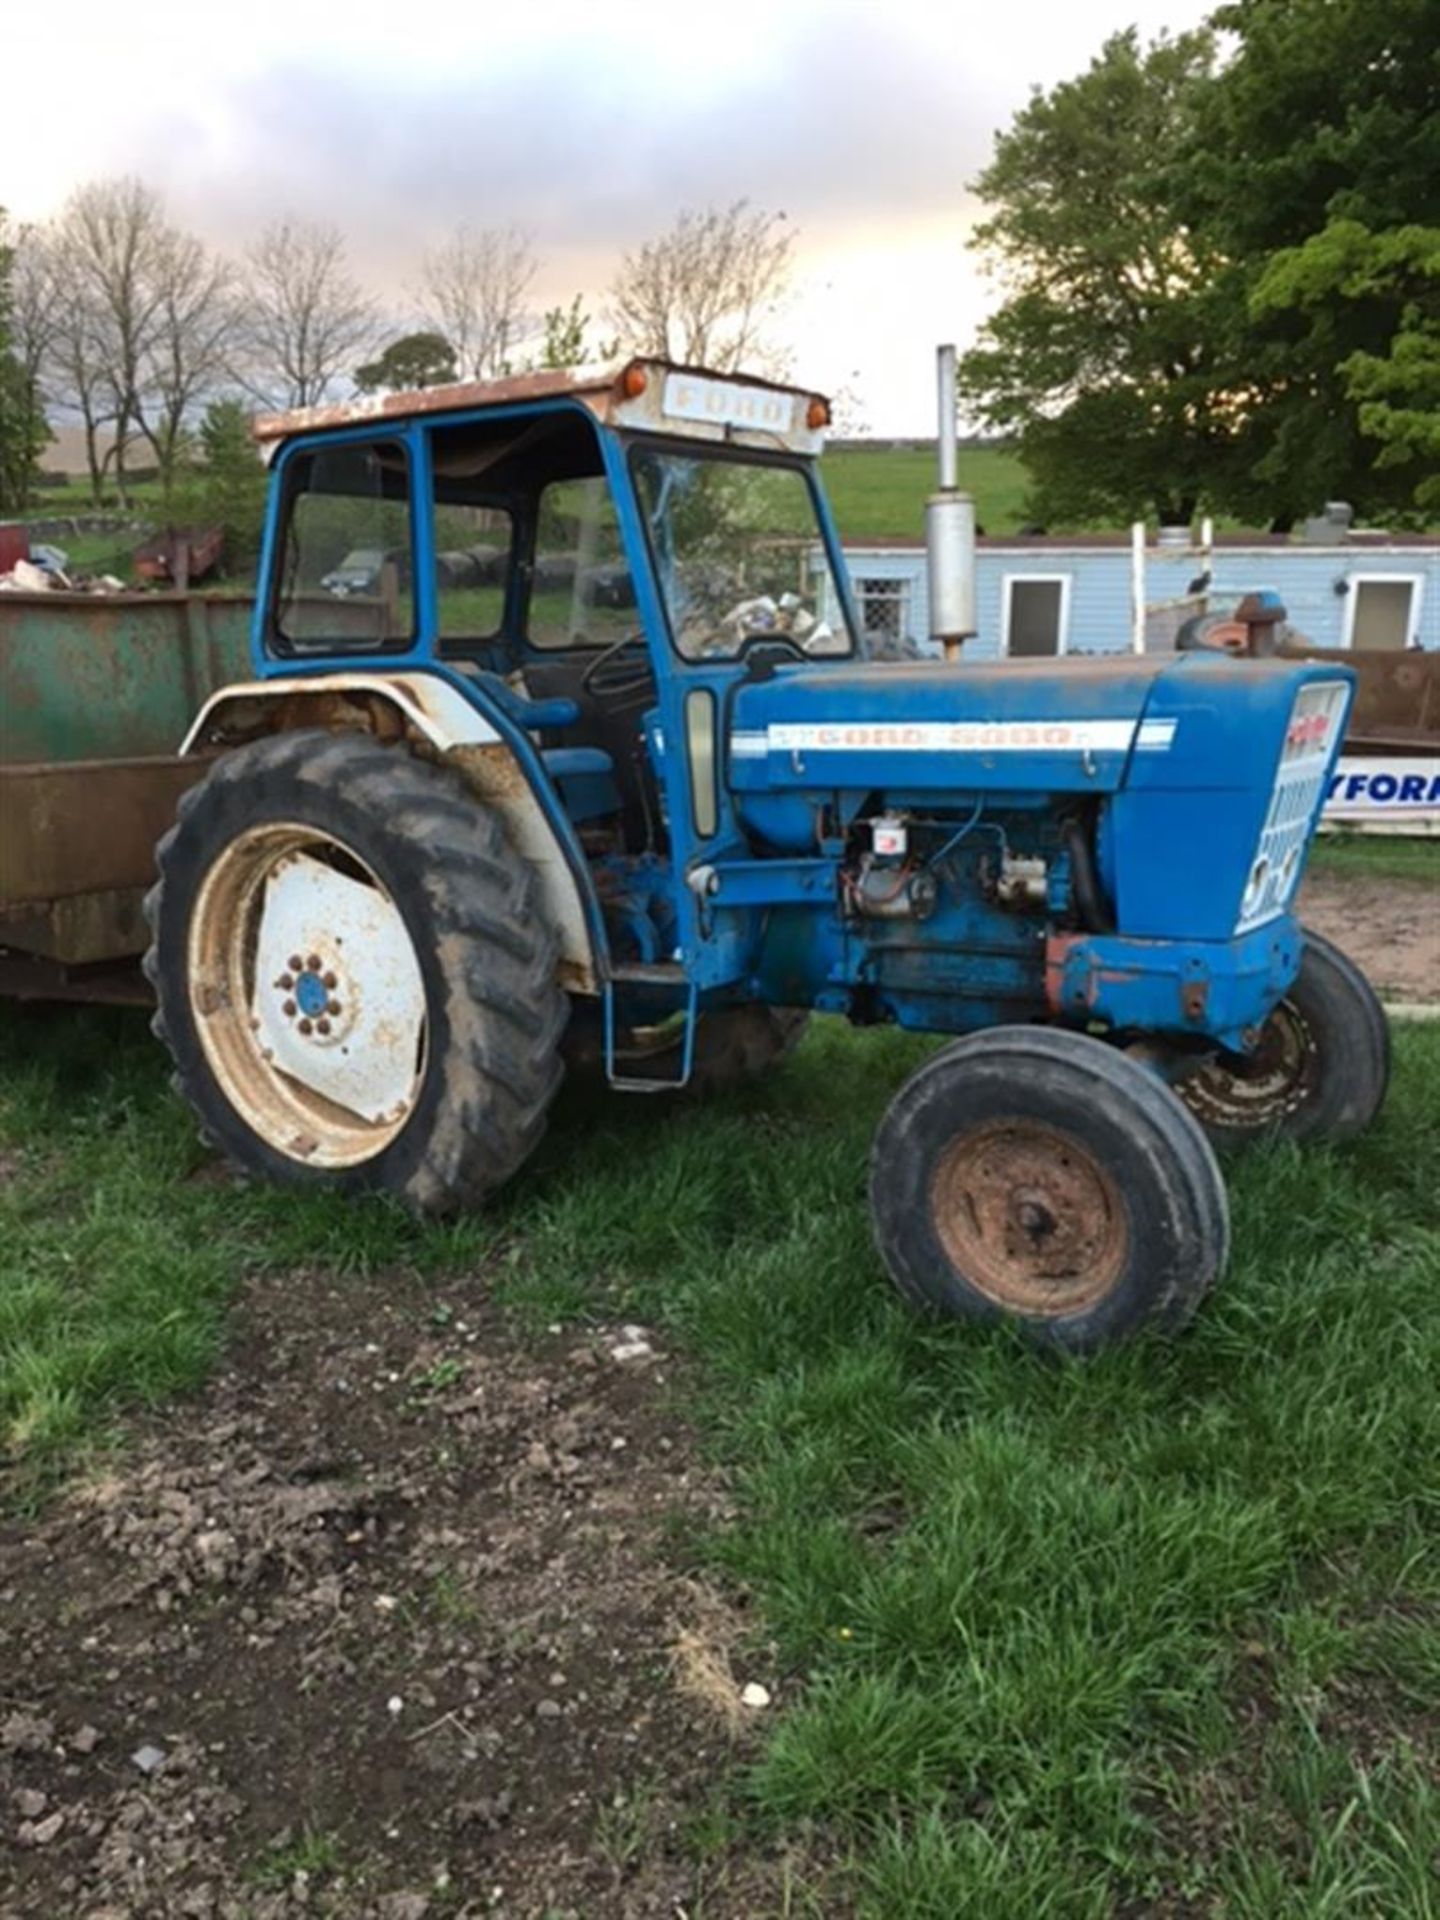 1974 FORD 5000 4cylinder diesel TRACTOR Reg. No. NFP 991M Serial No. 936233 Fitted with PUH and